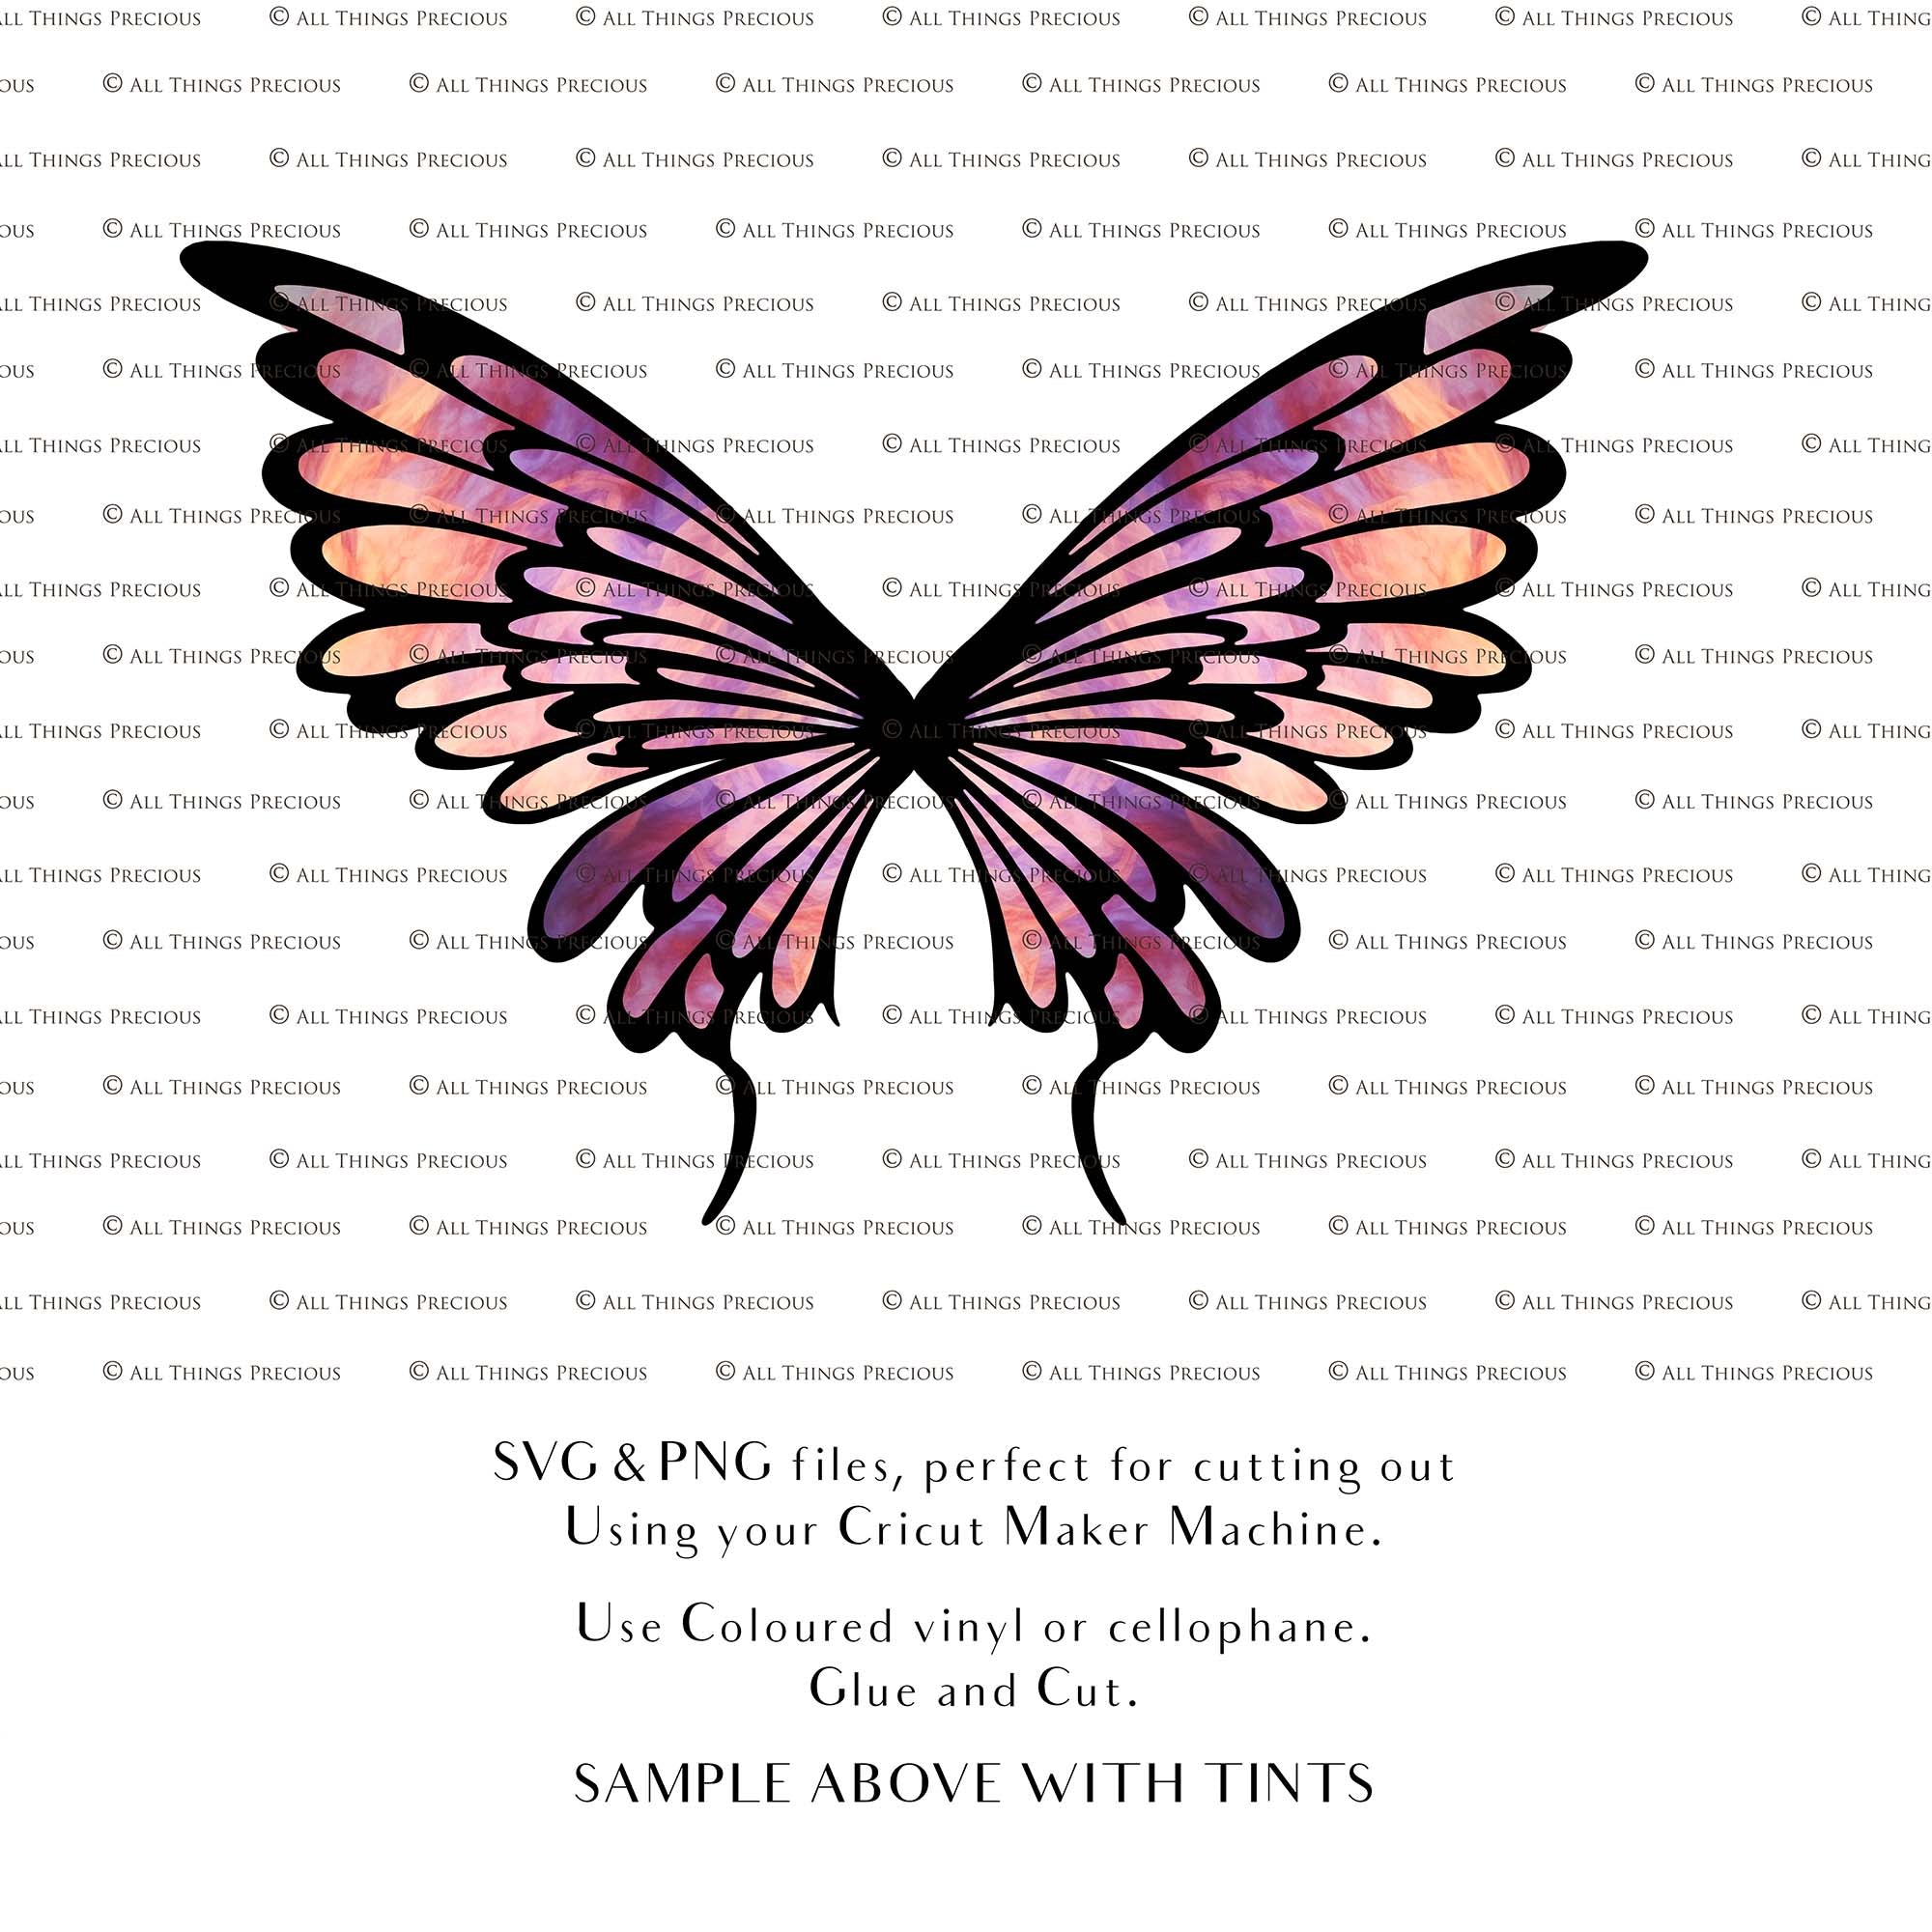 SVG, PNG Clipart, Fairy Wings, for Cricut and Silhouette Machine. Cut out and make your own real fairy wings. For Costumes, Halloween, Cosplay Wings, Adult Wings, Child size wings. Use them for Wedding invitations, sublimation print  or decorations.